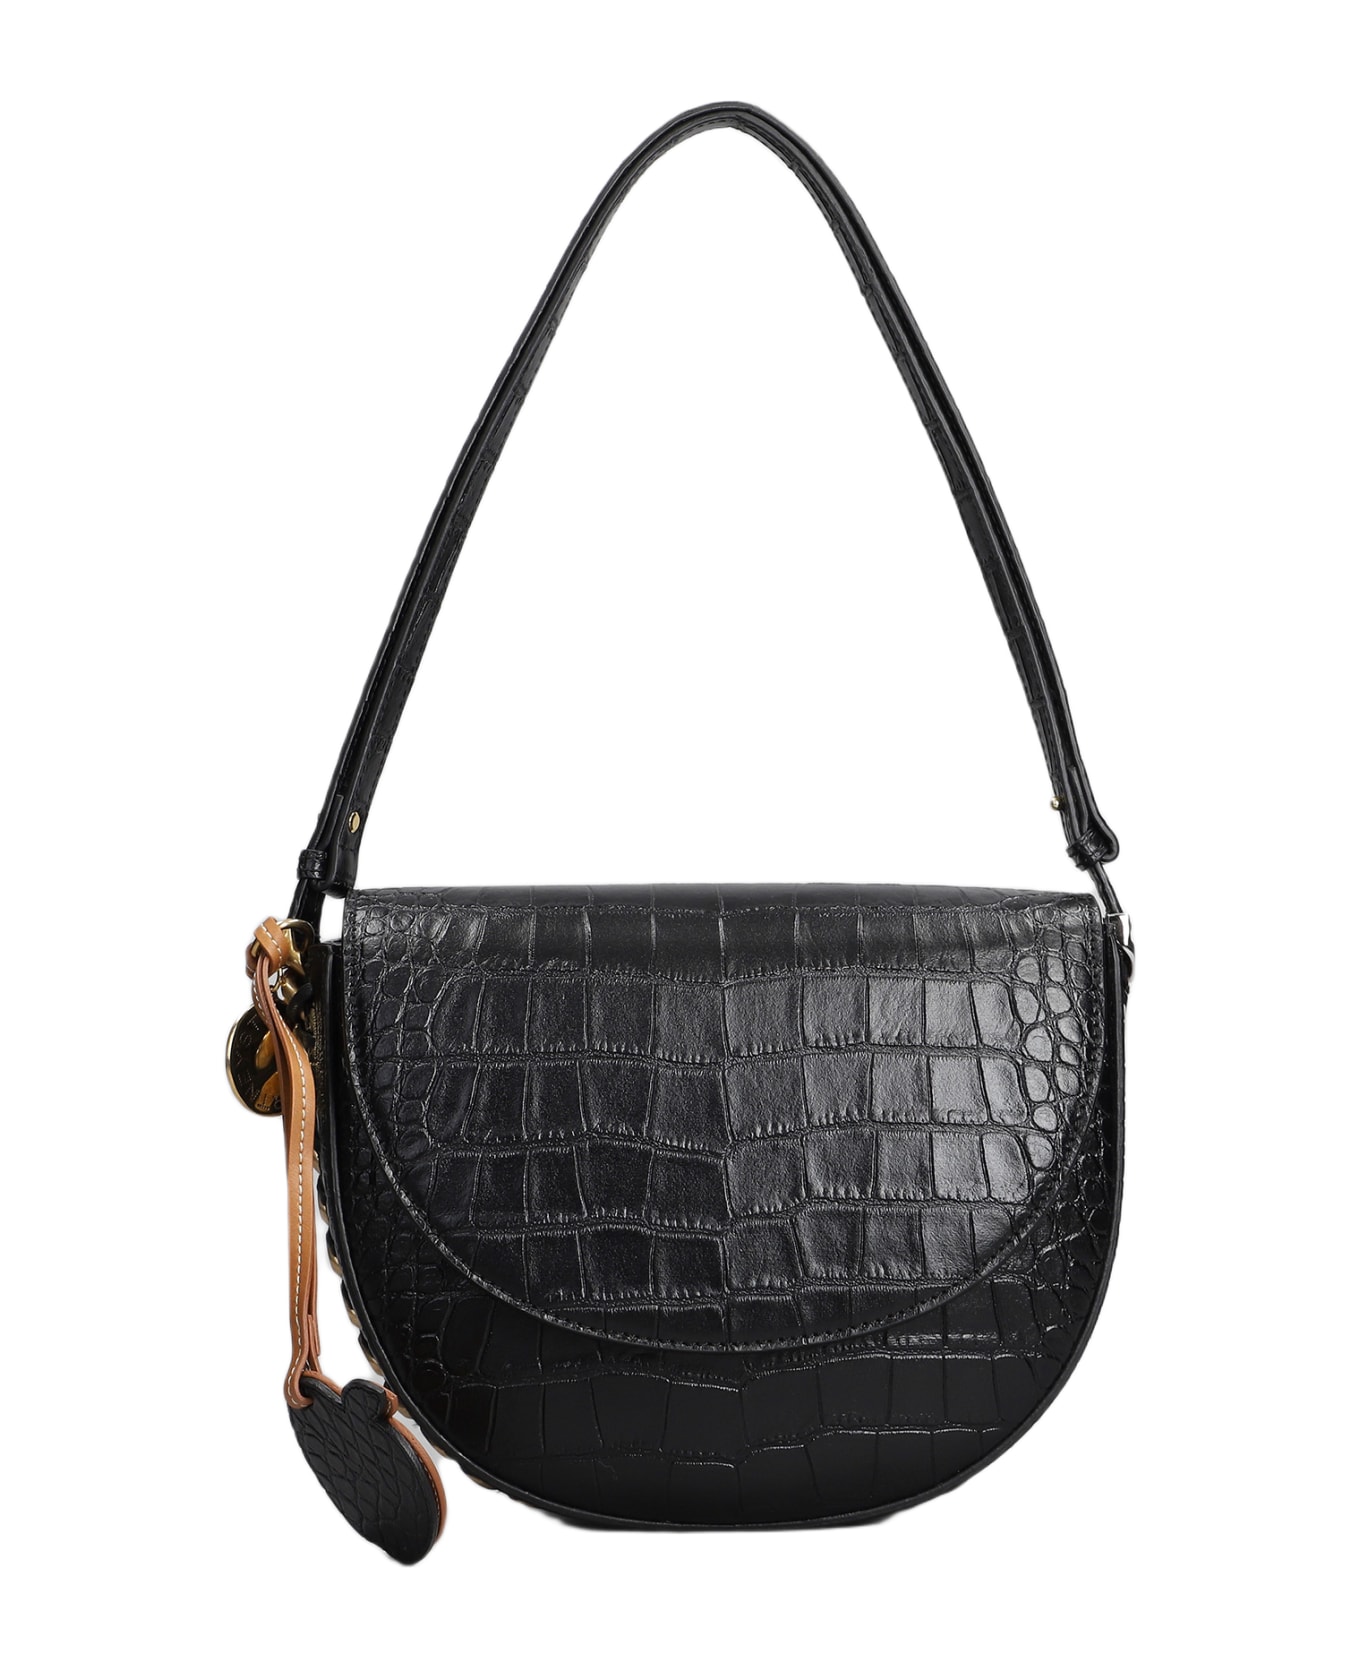 Stella McCartney Tote In Black Faux Leather - black トートバッグ